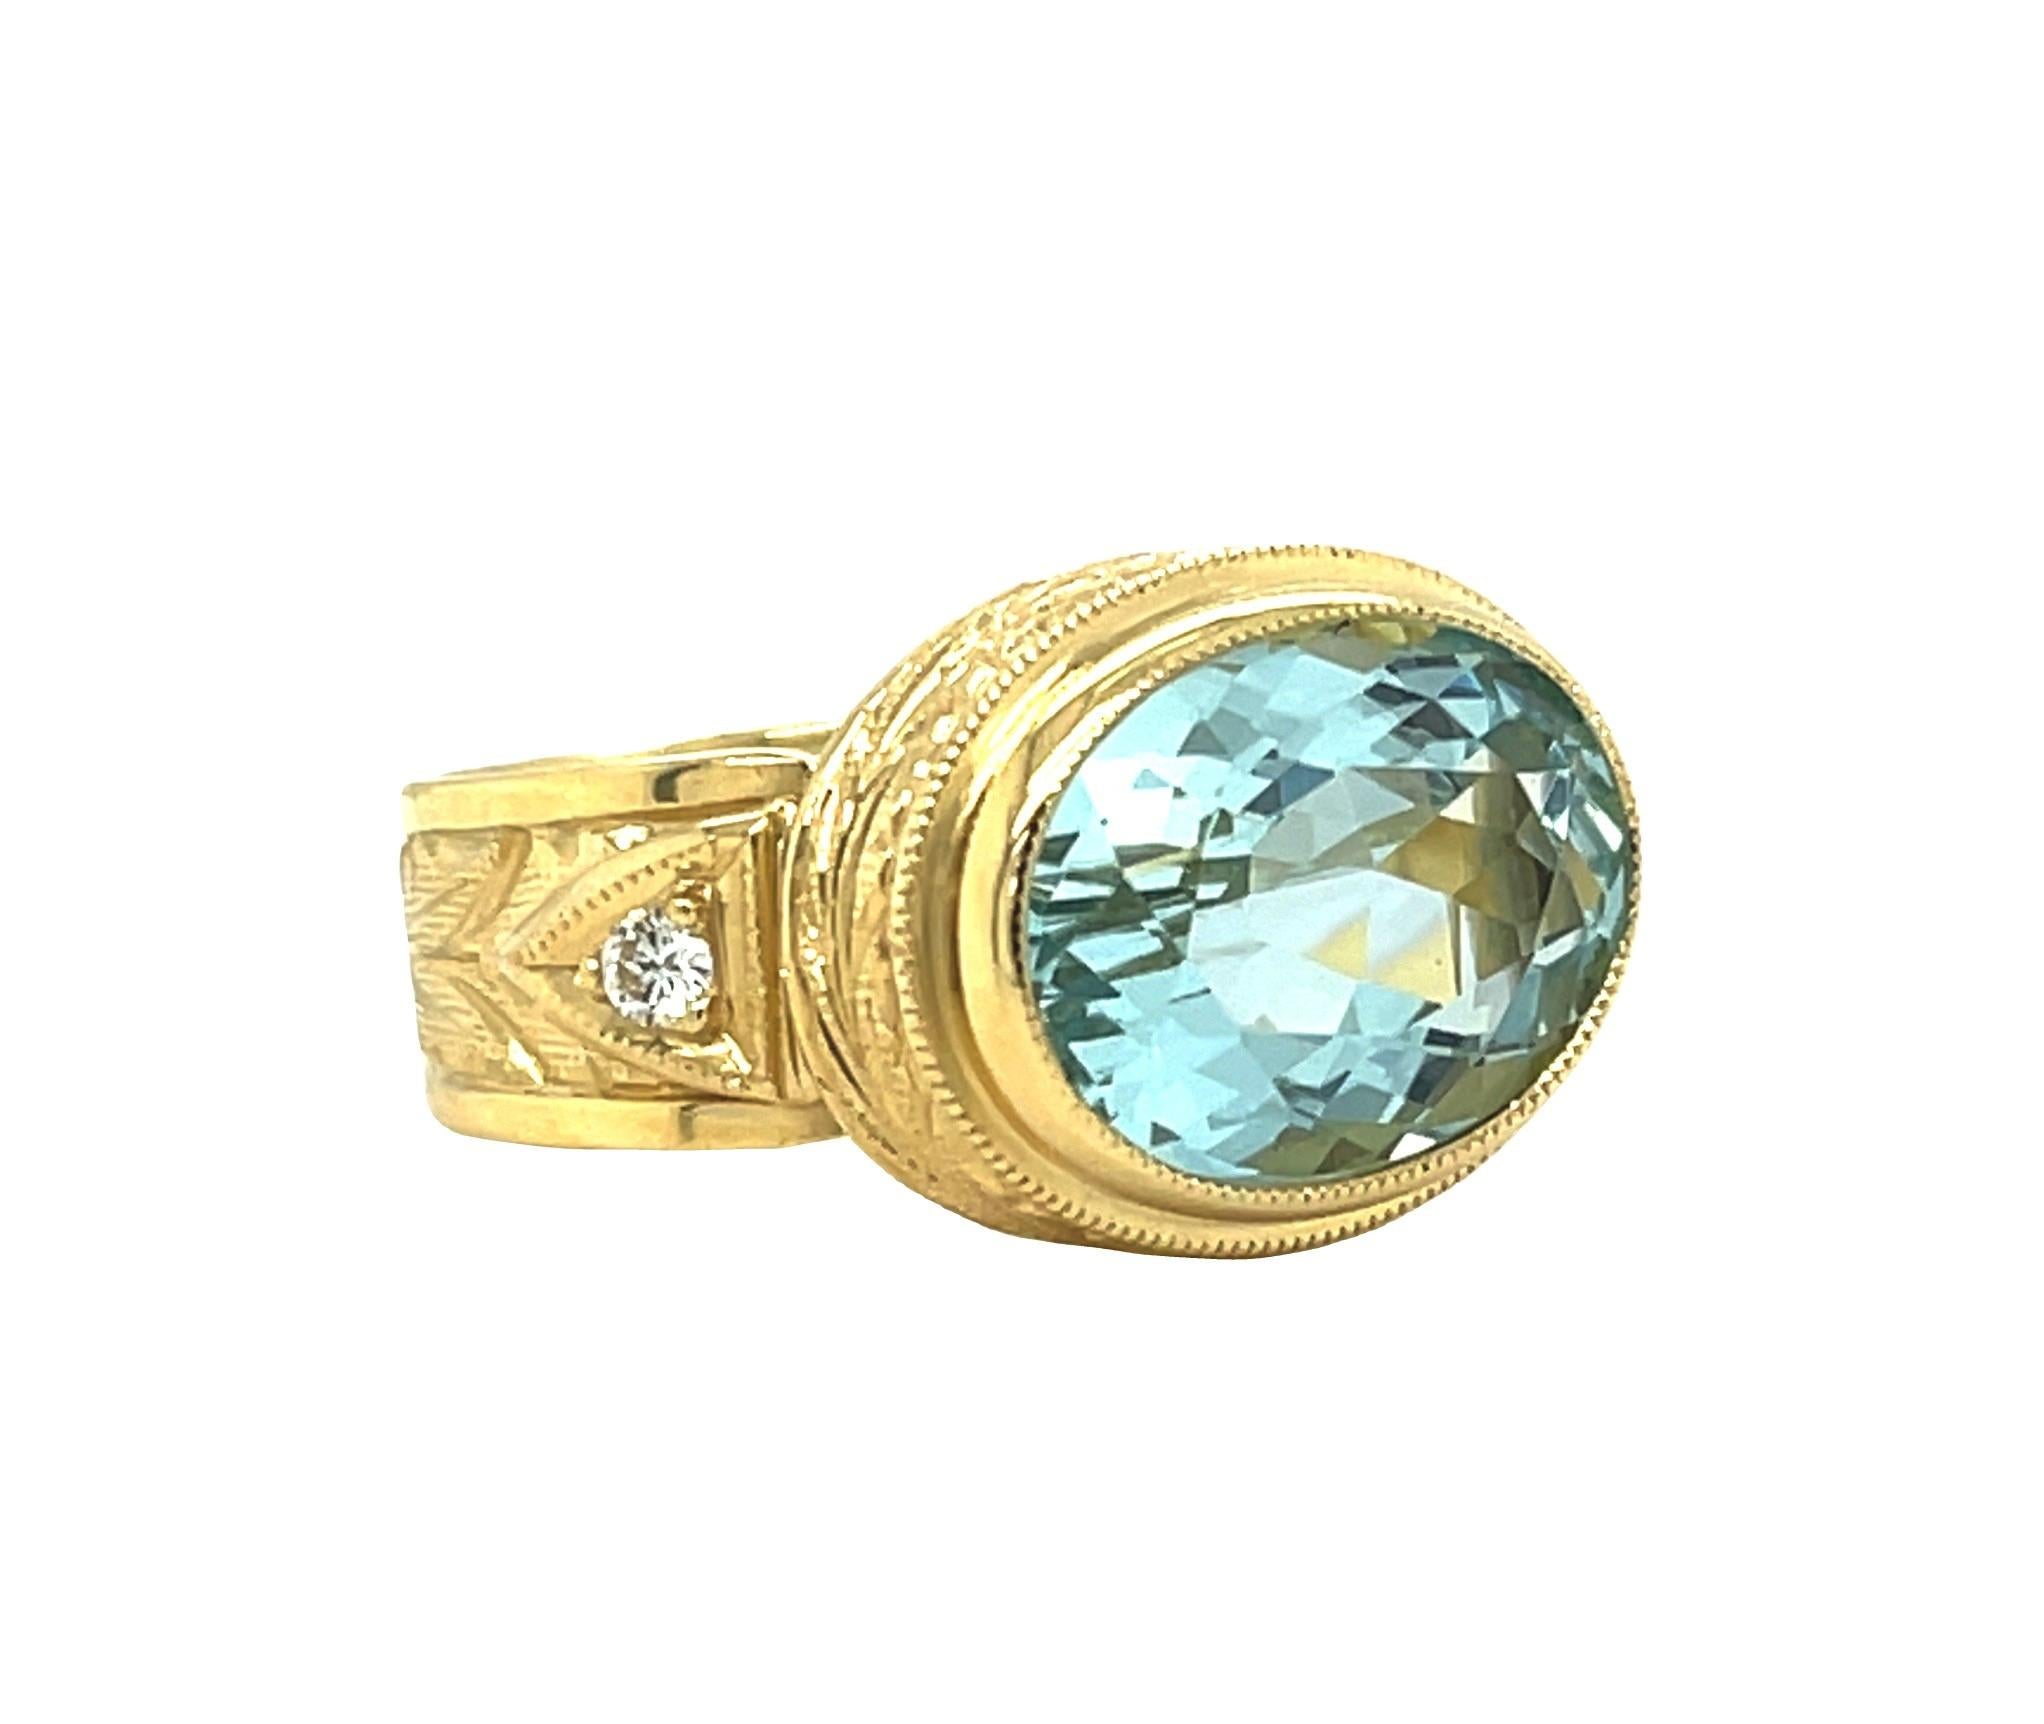 6.16 Carat Aquamarine in 18k Yellow Gold, Hand Engraved Ring with Diamonds For Sale 1